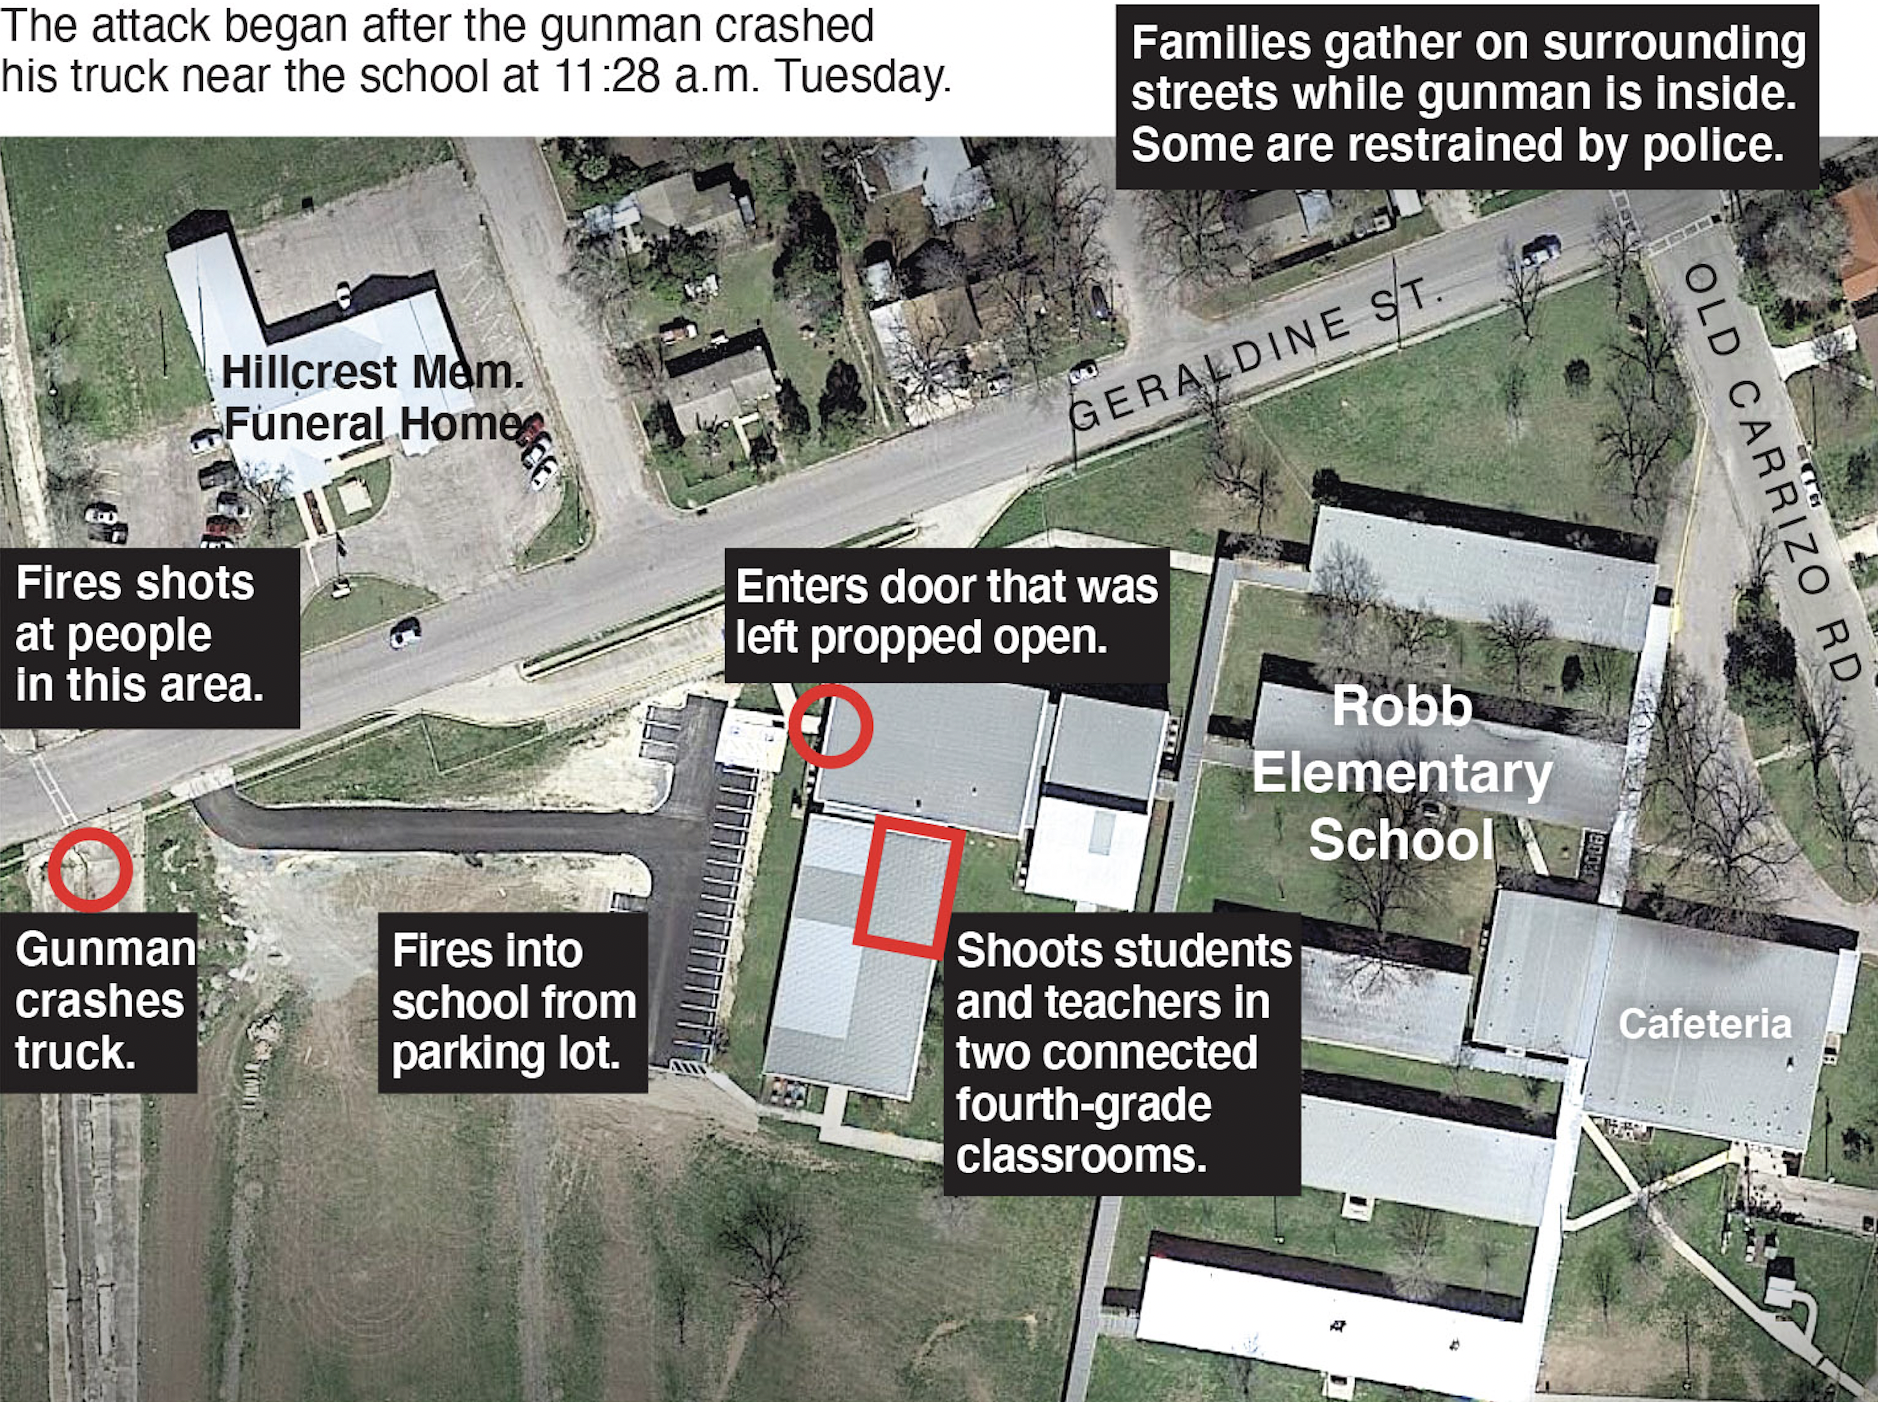 Sources: Video footage, law enforcement officials and a former student familiar with the school layout. Graphic: The New York Times.